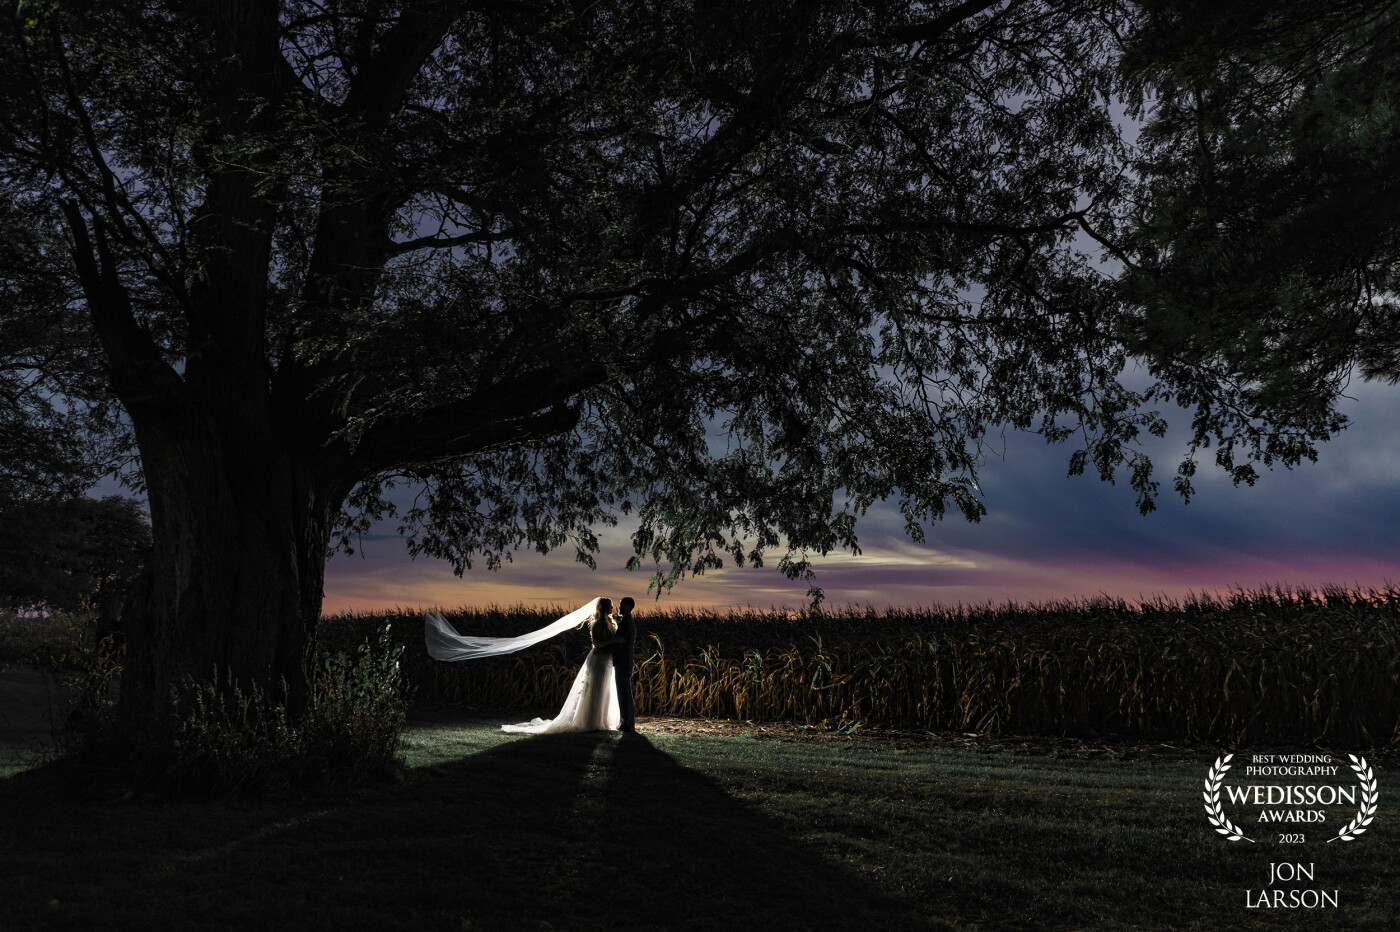 Sun setting quickly into the night. The bride and groom framed perfectly under a single tree over hanging the October cornfields added to this beautiful couple as they embraced in love under the setting sun.